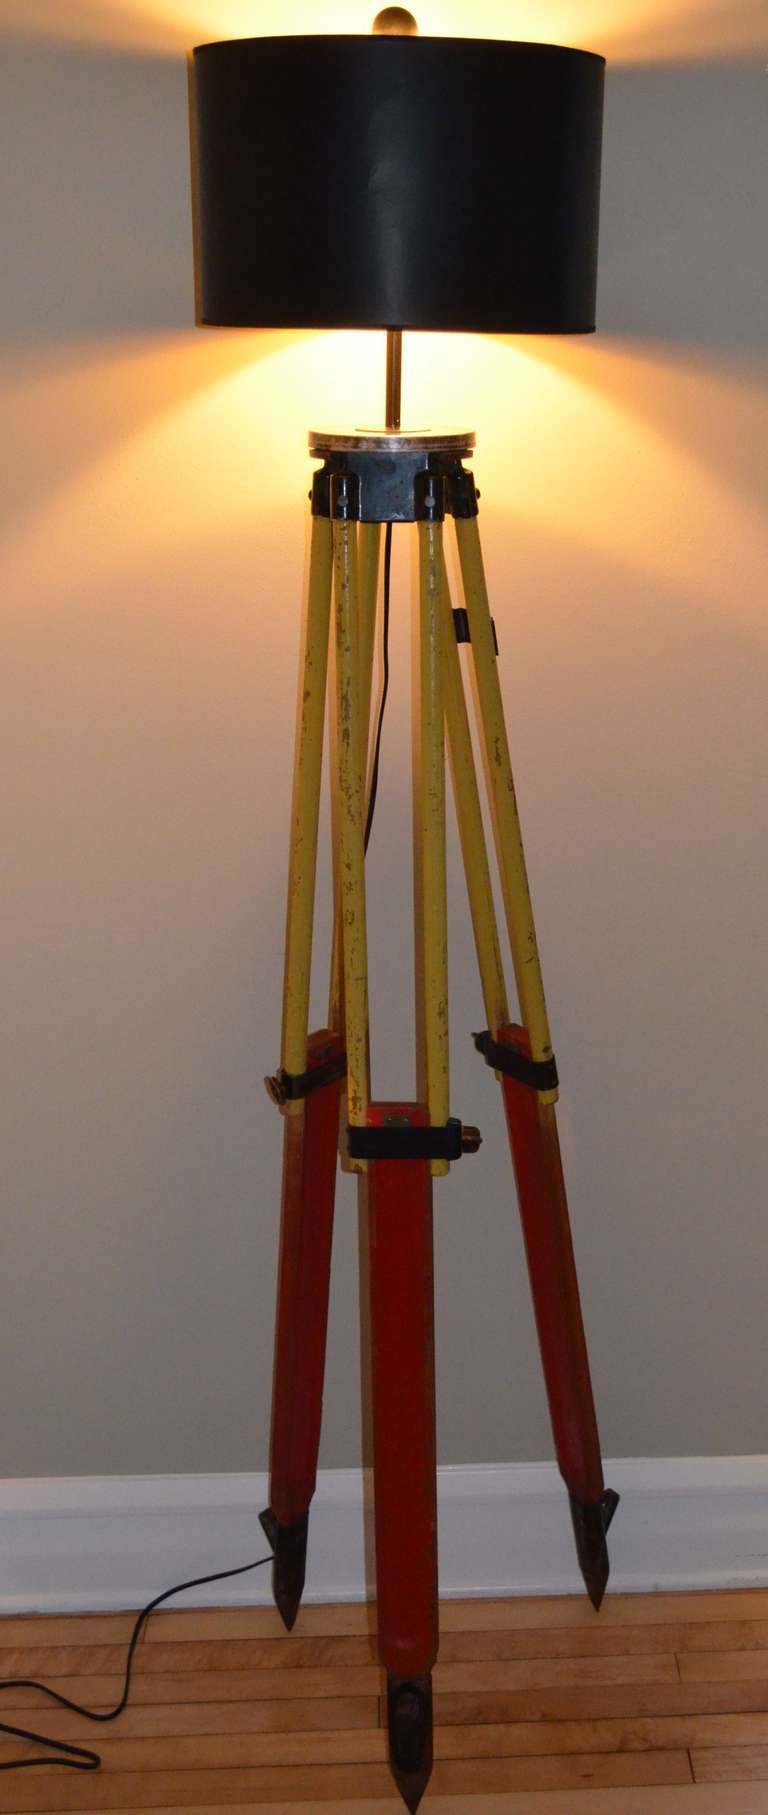 American Floor Lamp made from a Surveyor's Tripod